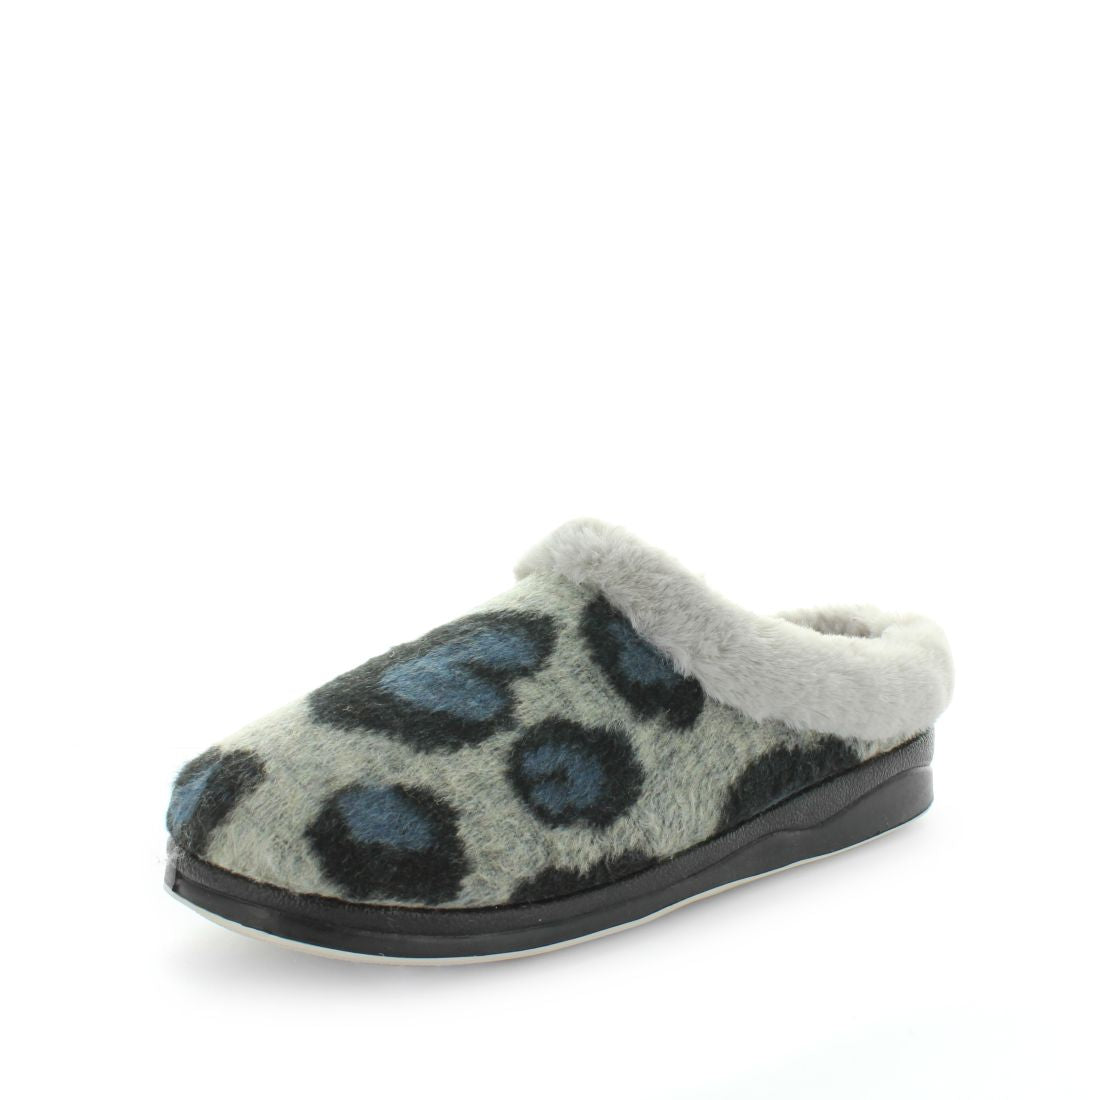 womens slippers - camel Endy slipper, by panda Slippers. A scuff style slipper with a micro-terry design for warmth and an extra comfy fit with anon slip sole - comfort womens slippers